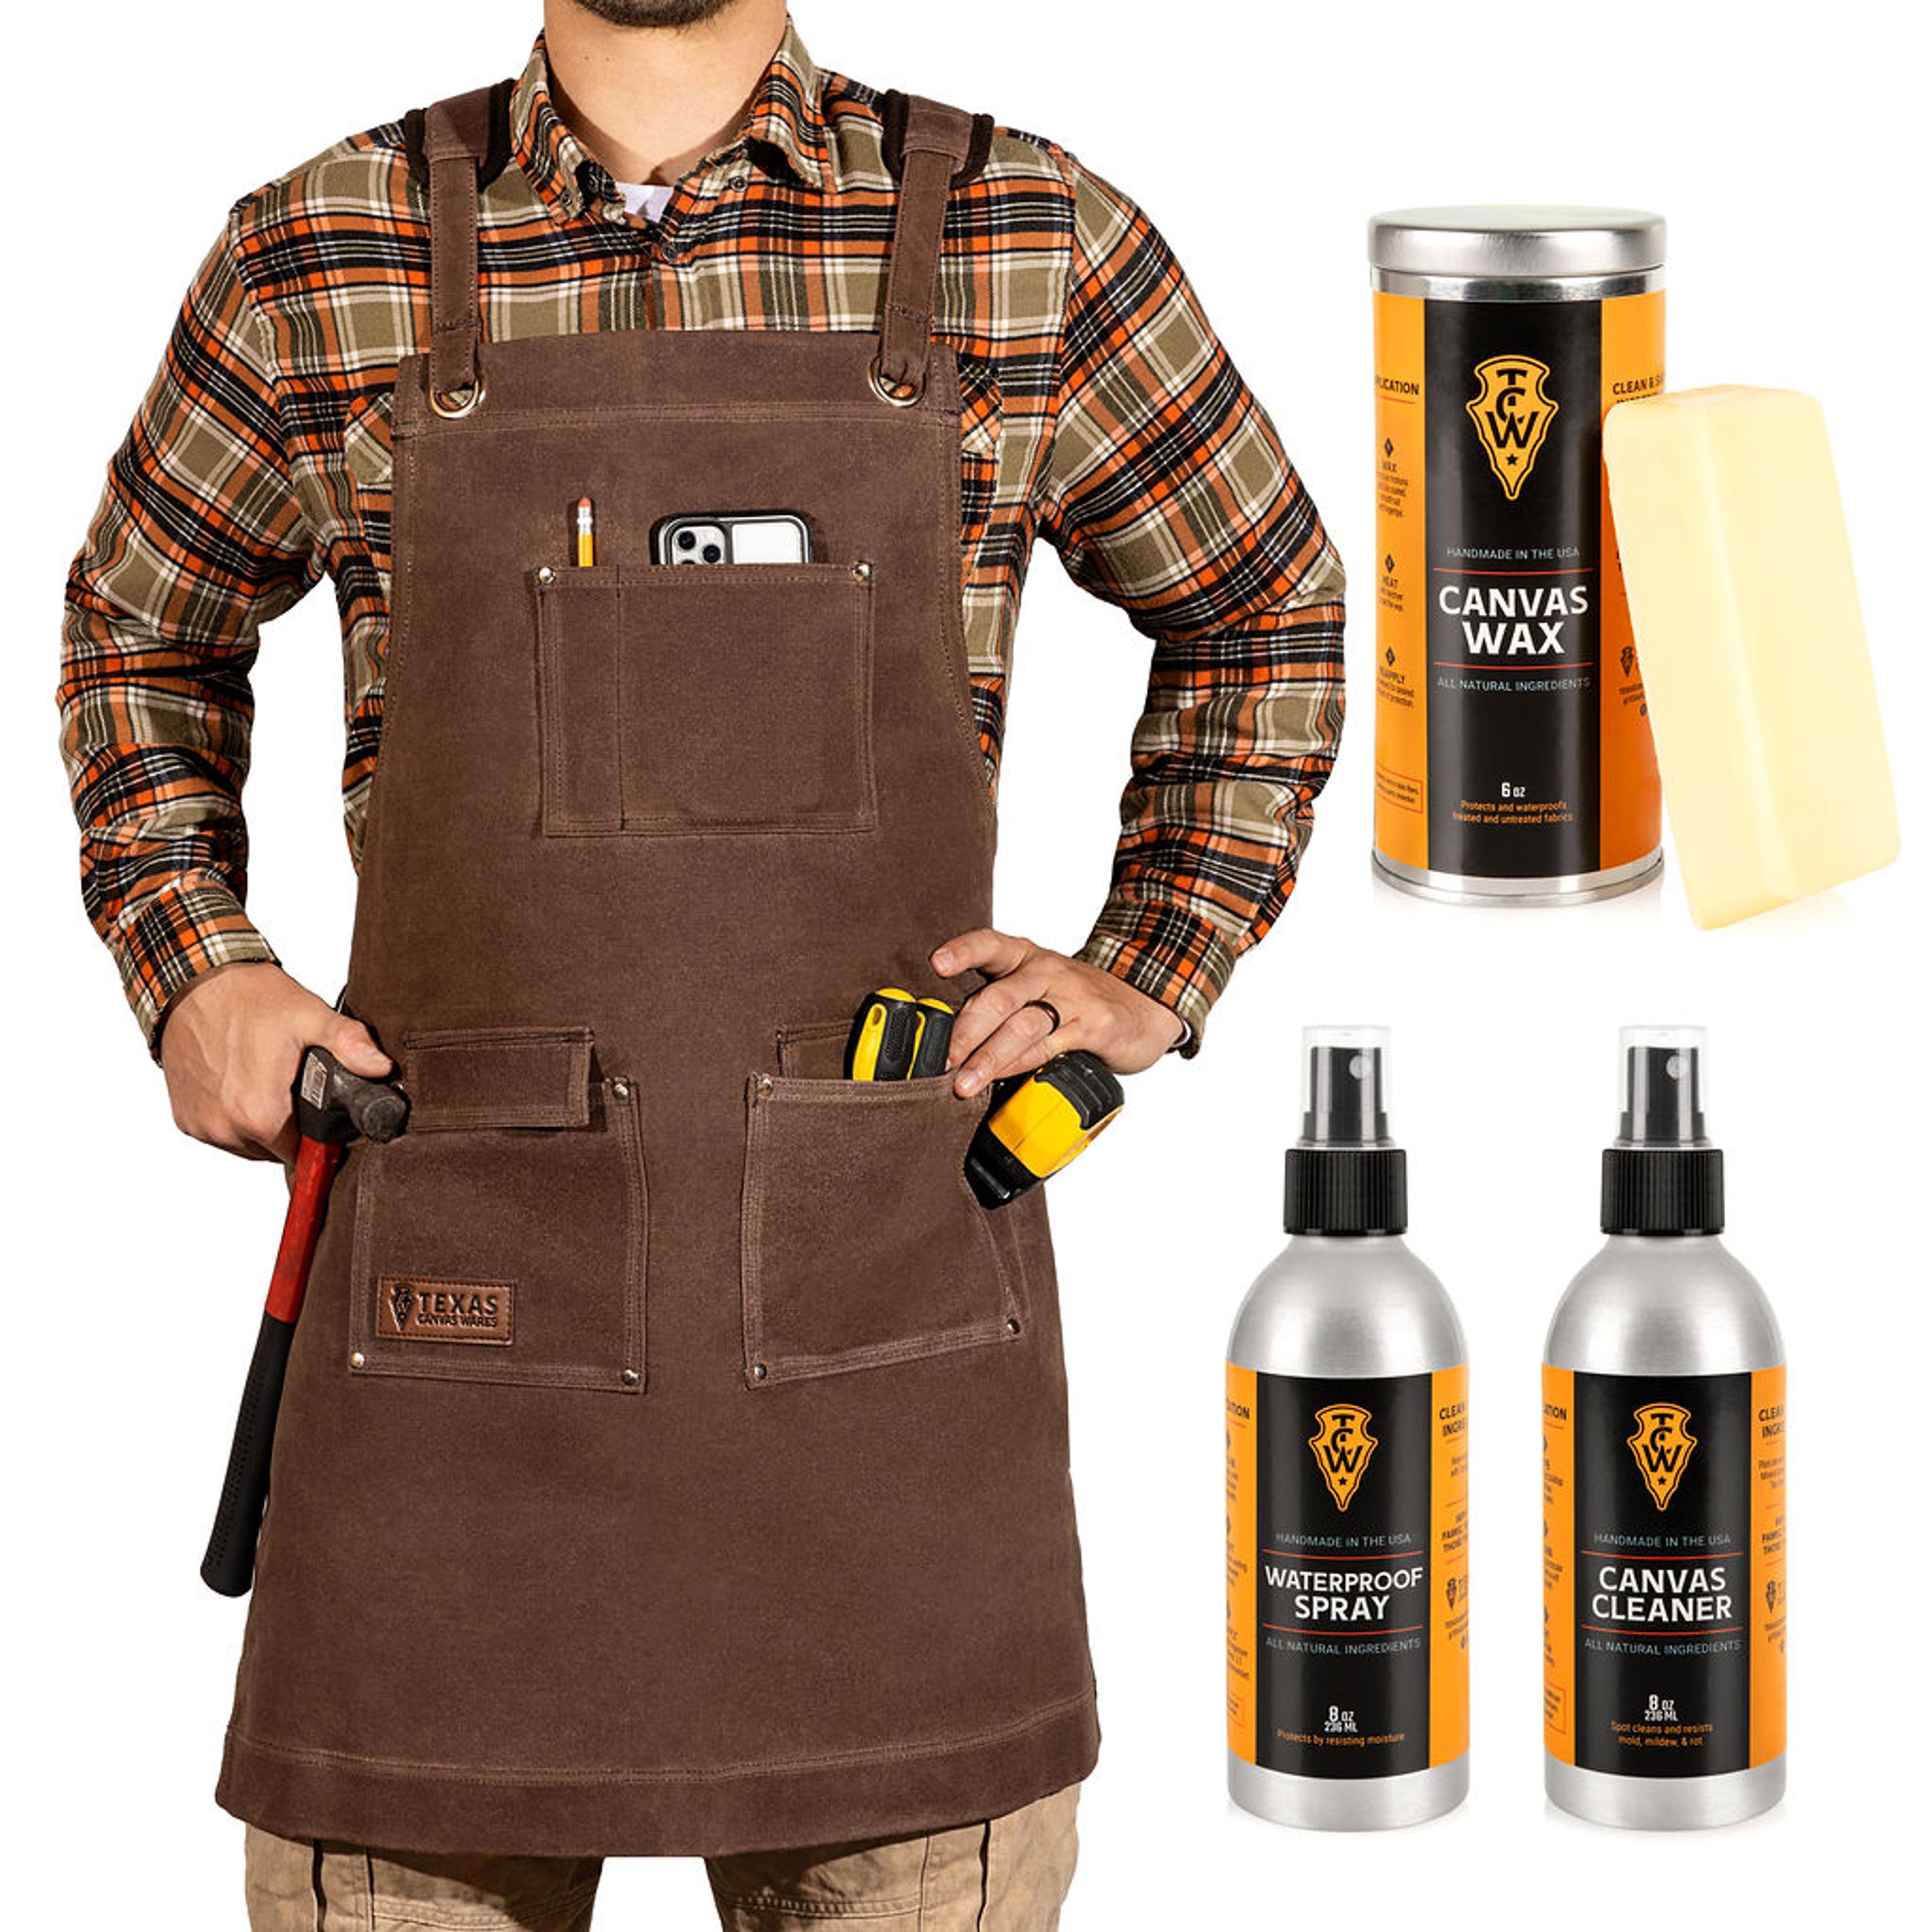 Waxed Canvas Apron Gift Set - Handmade in the USA